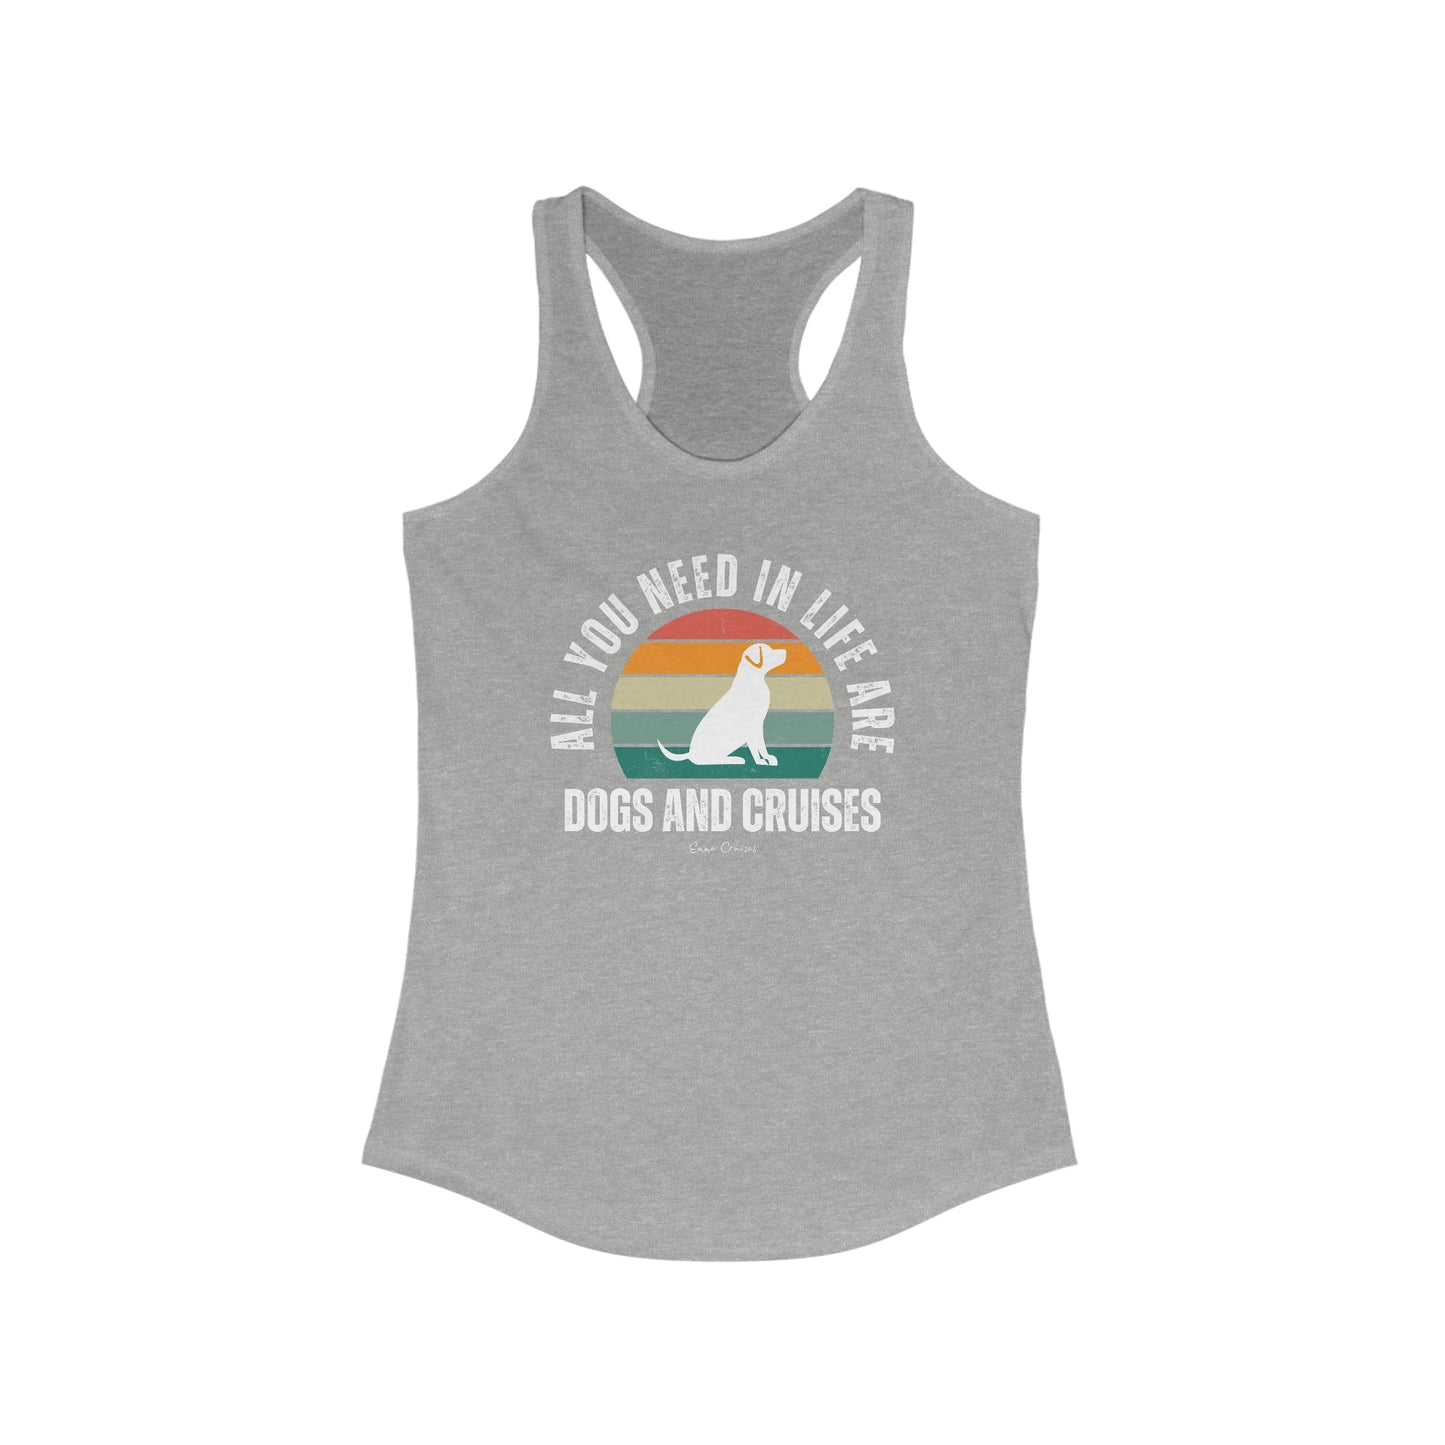 Dogs and Cruises - Tank Top